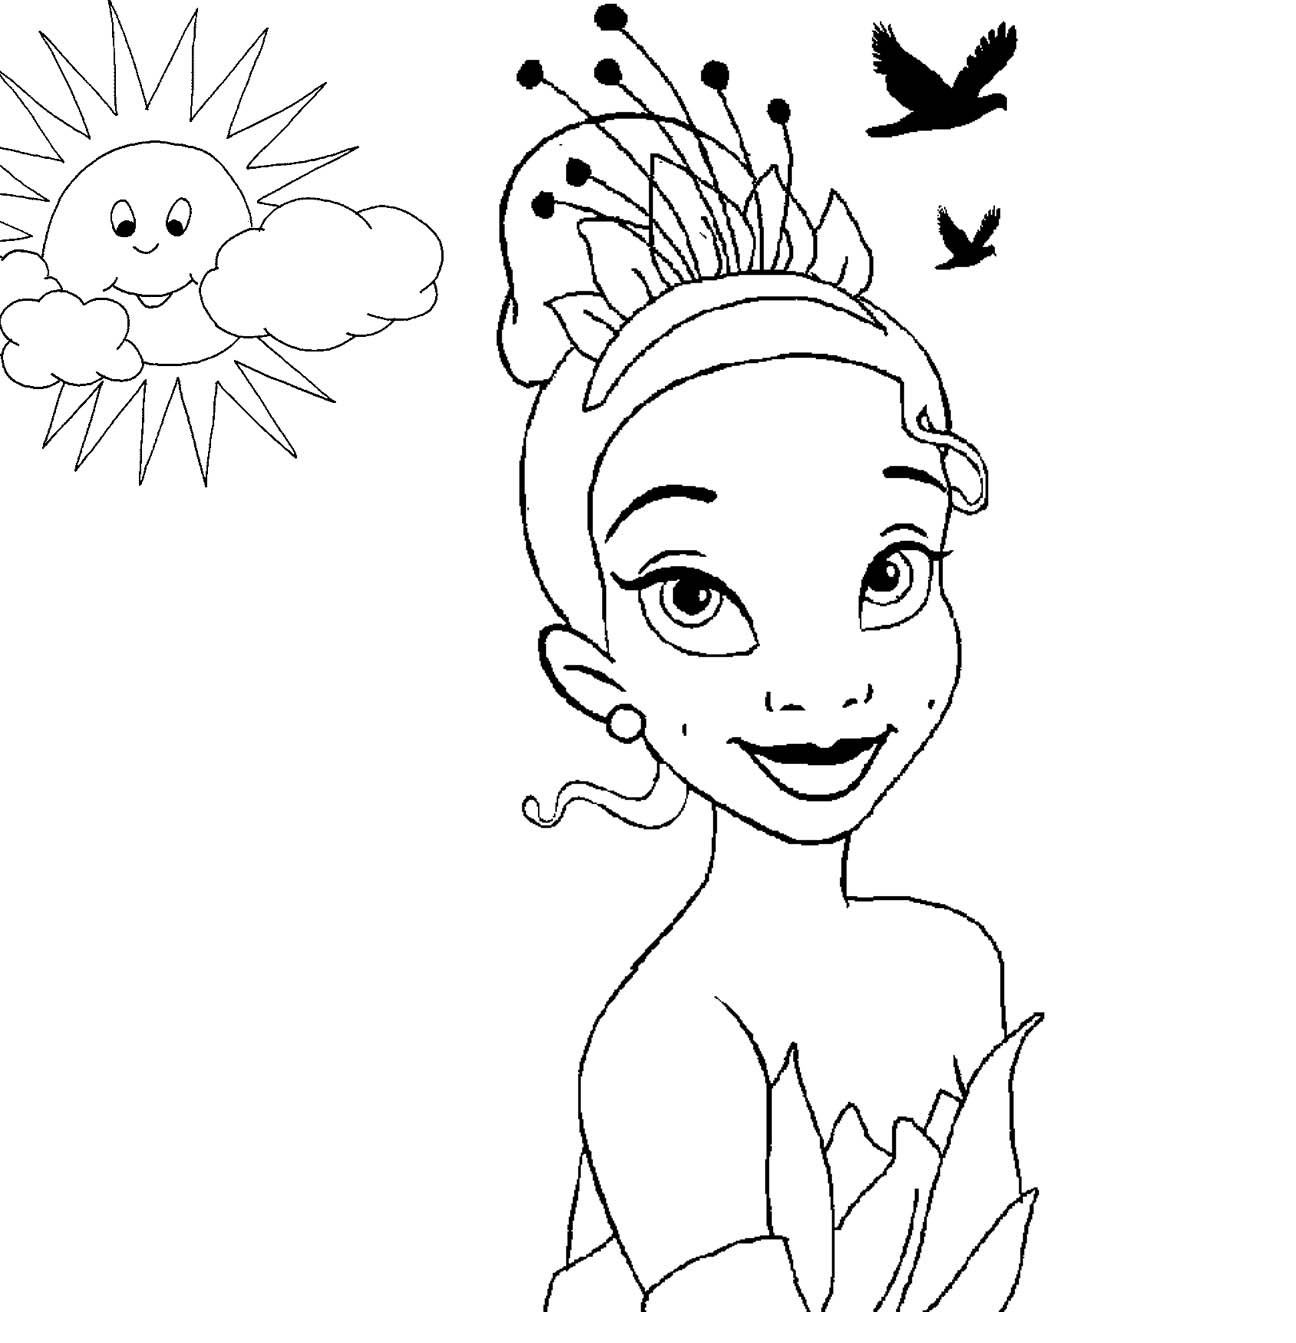 Coloring Pages Disney For Girls
 Disney Princess Tiana Coloring Pages To Girls